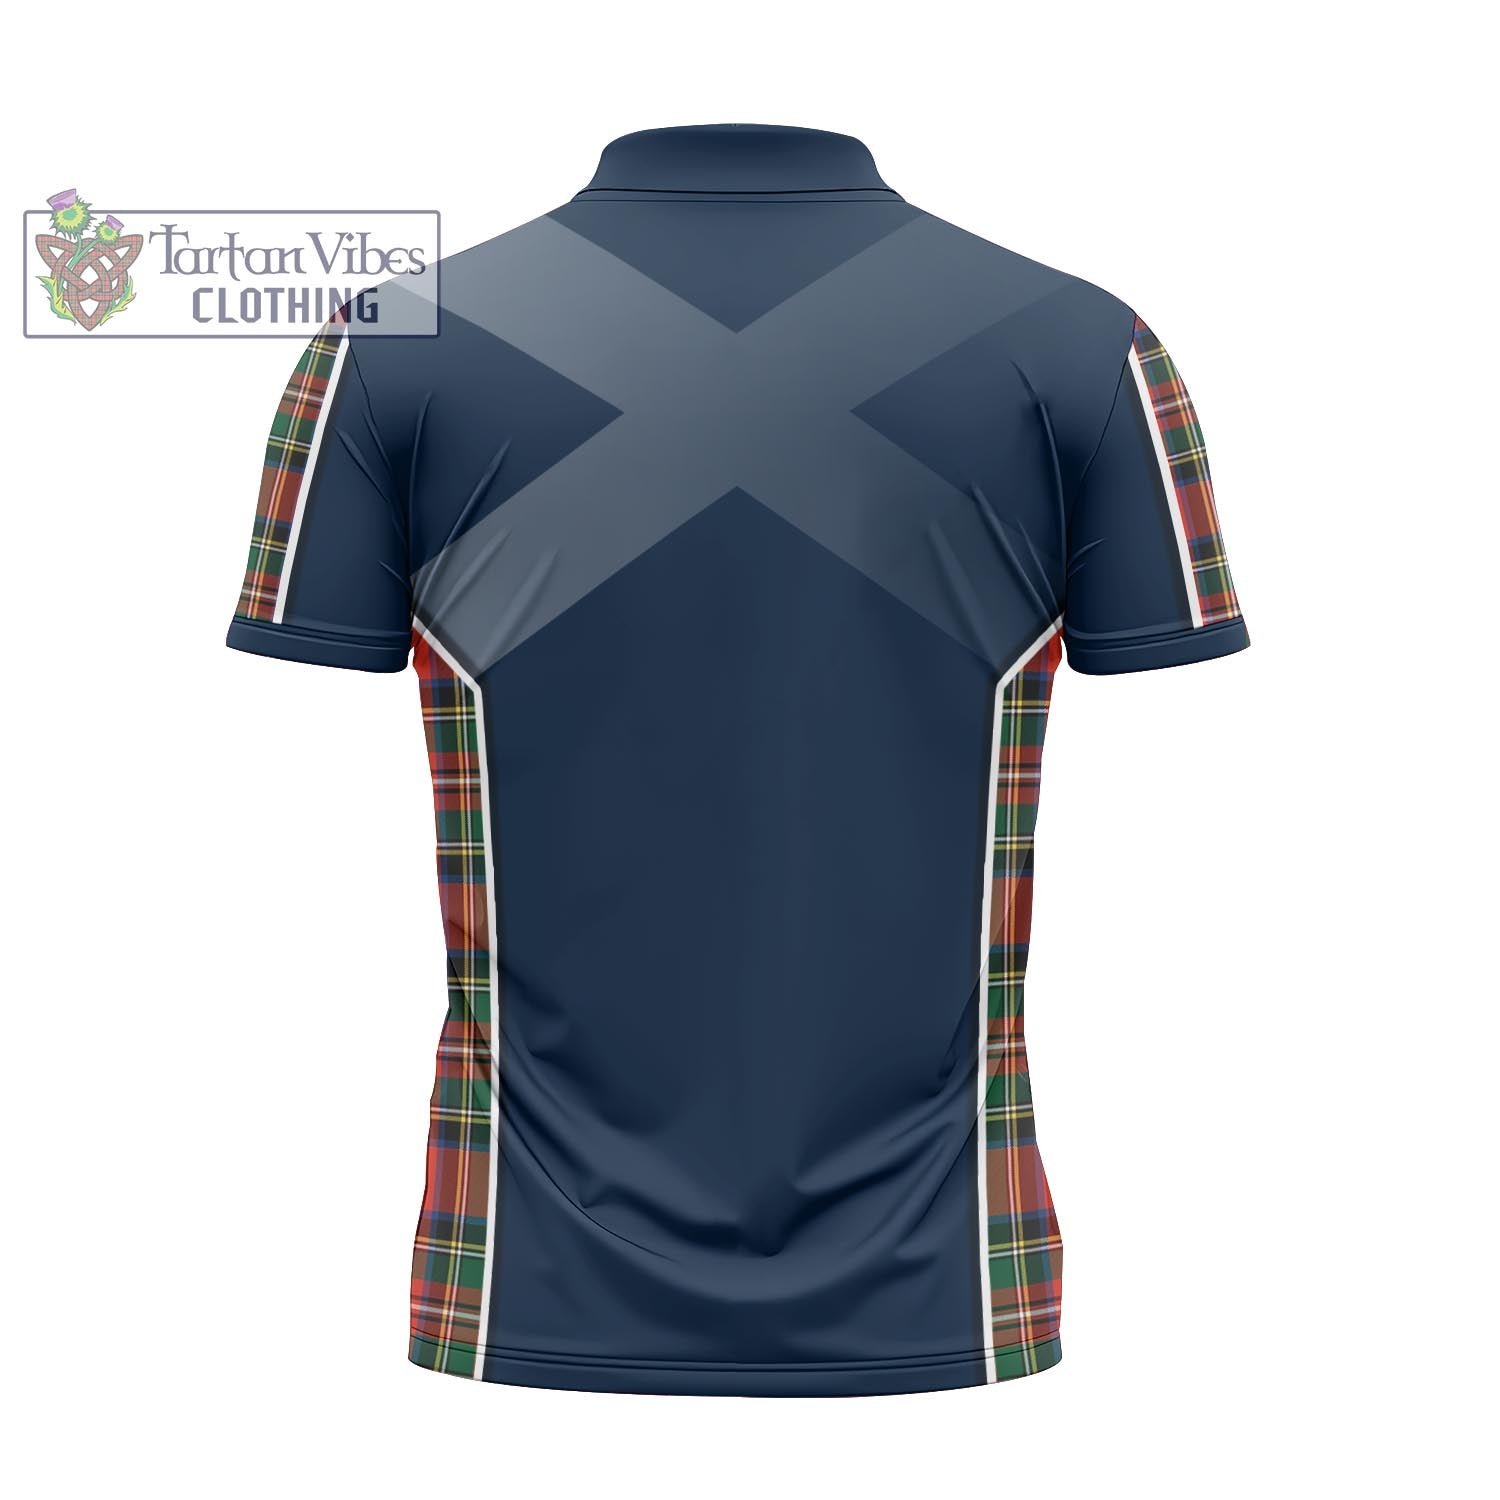 Tartan Vibes Clothing Lyle Tartan Zipper Polo Shirt with Family Crest and Scottish Thistle Vibes Sport Style